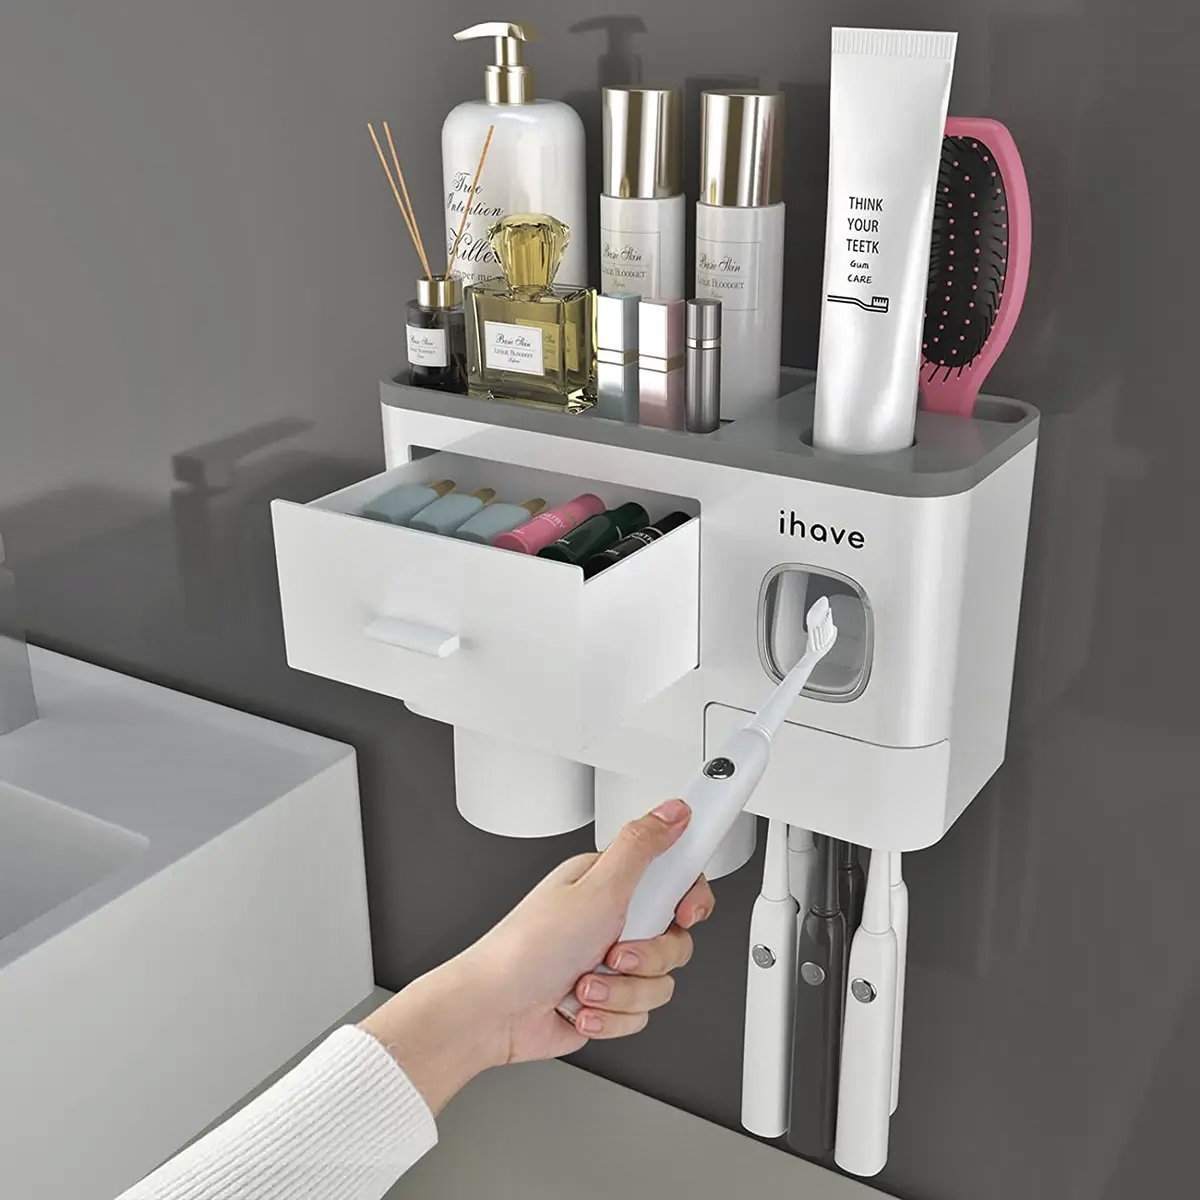 What Can You Use A Wall Mounted Toothbrush Holder For